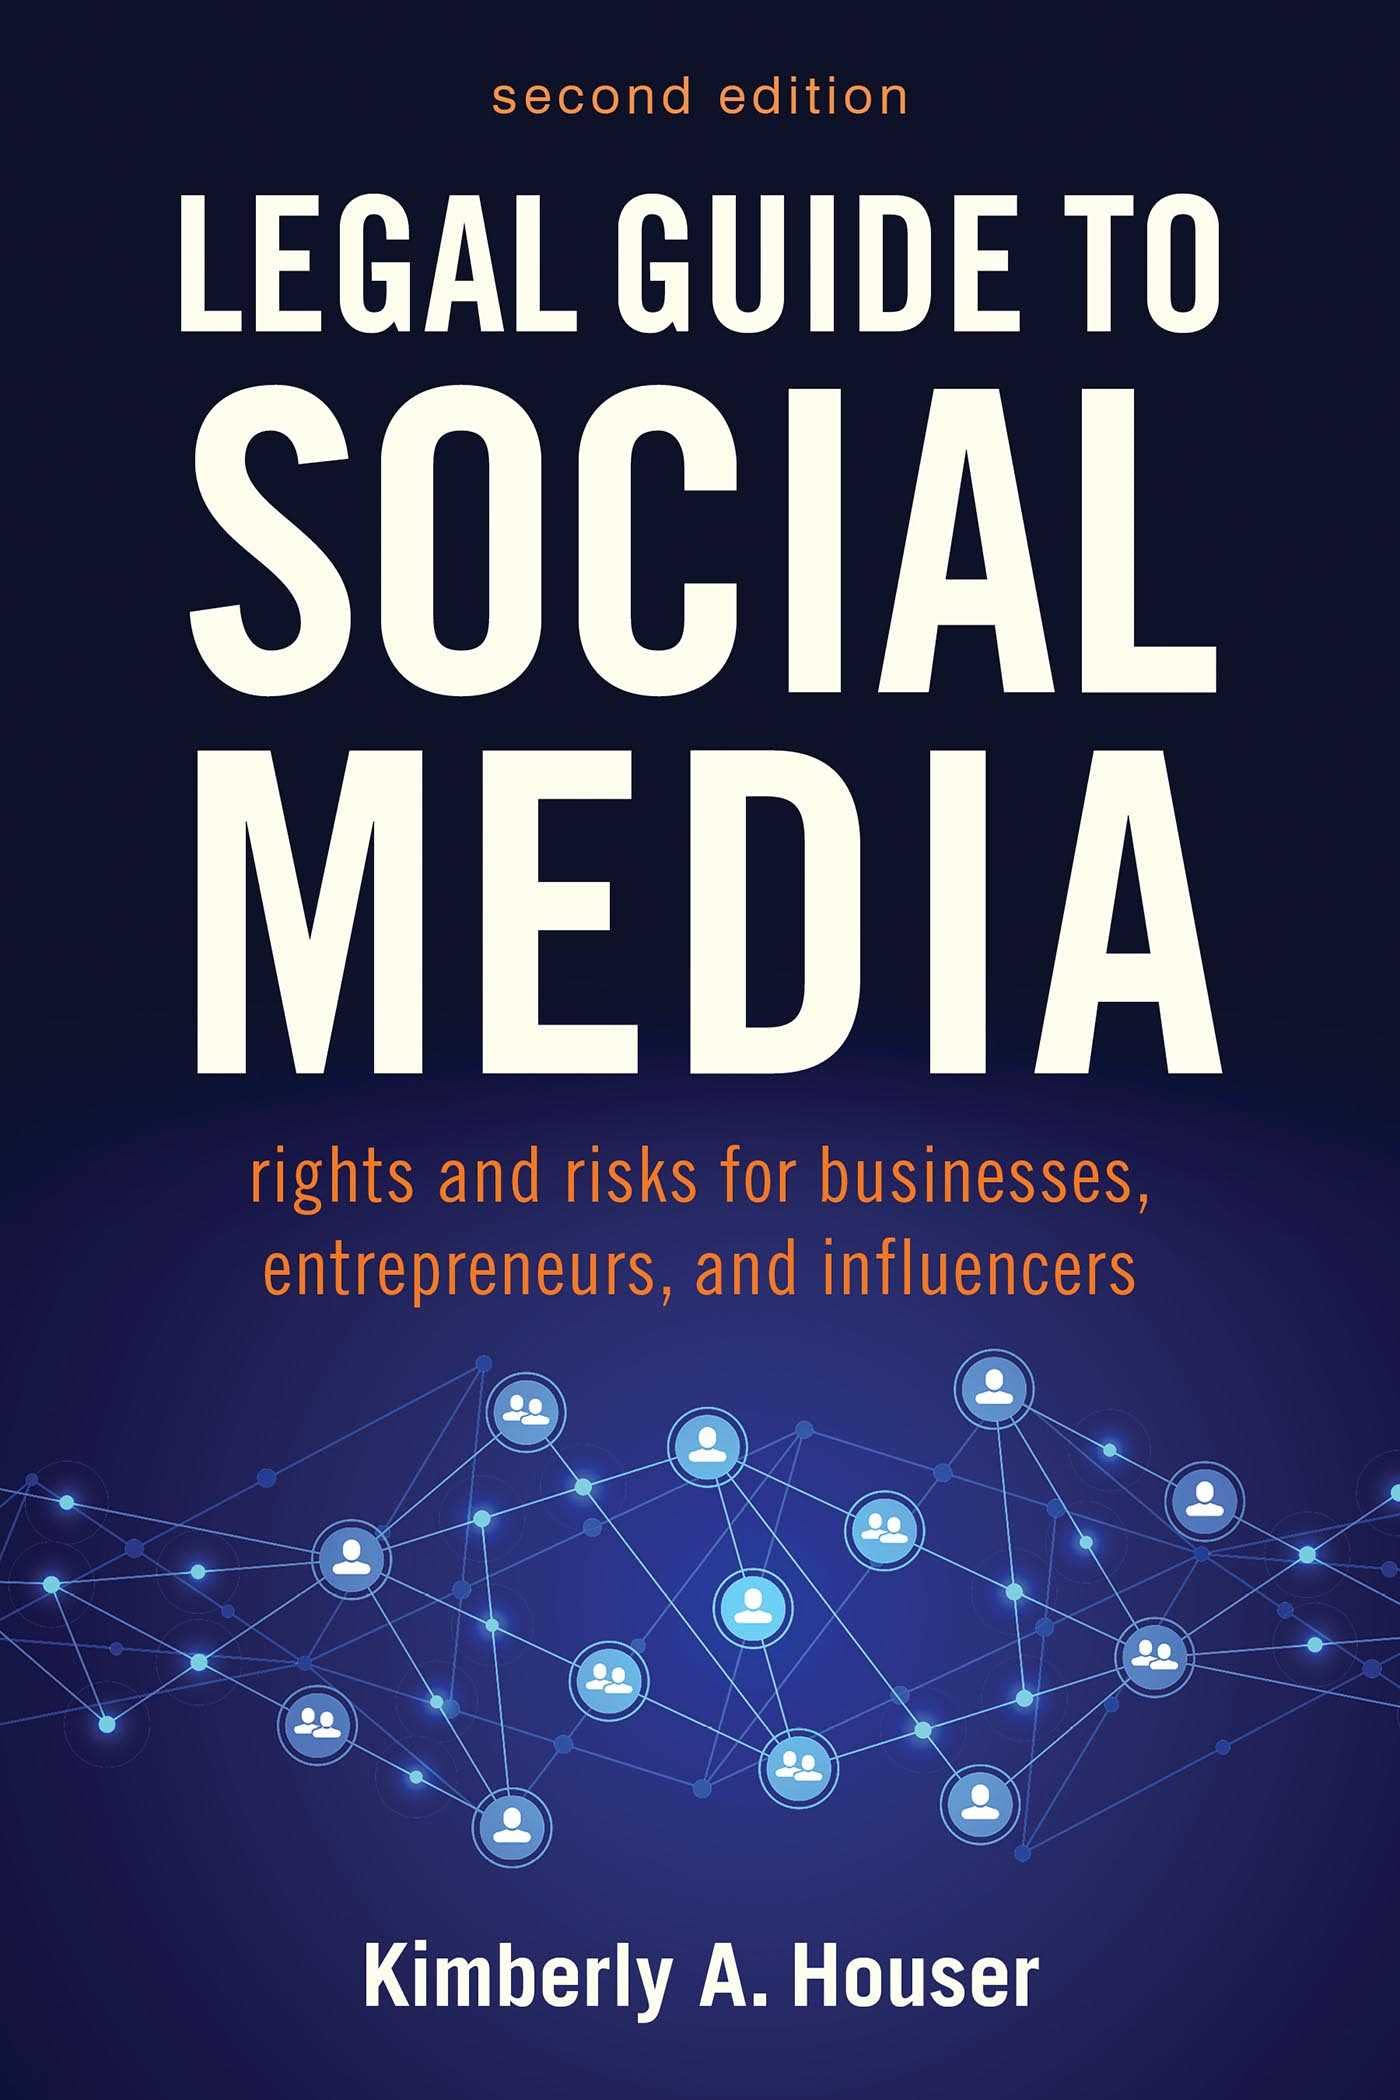 Legal Guide to Social Media, Second Edition: Rights and Risks for Businesses, Entrepreneurs, and Influencers - SureShot Books Publishing LLC